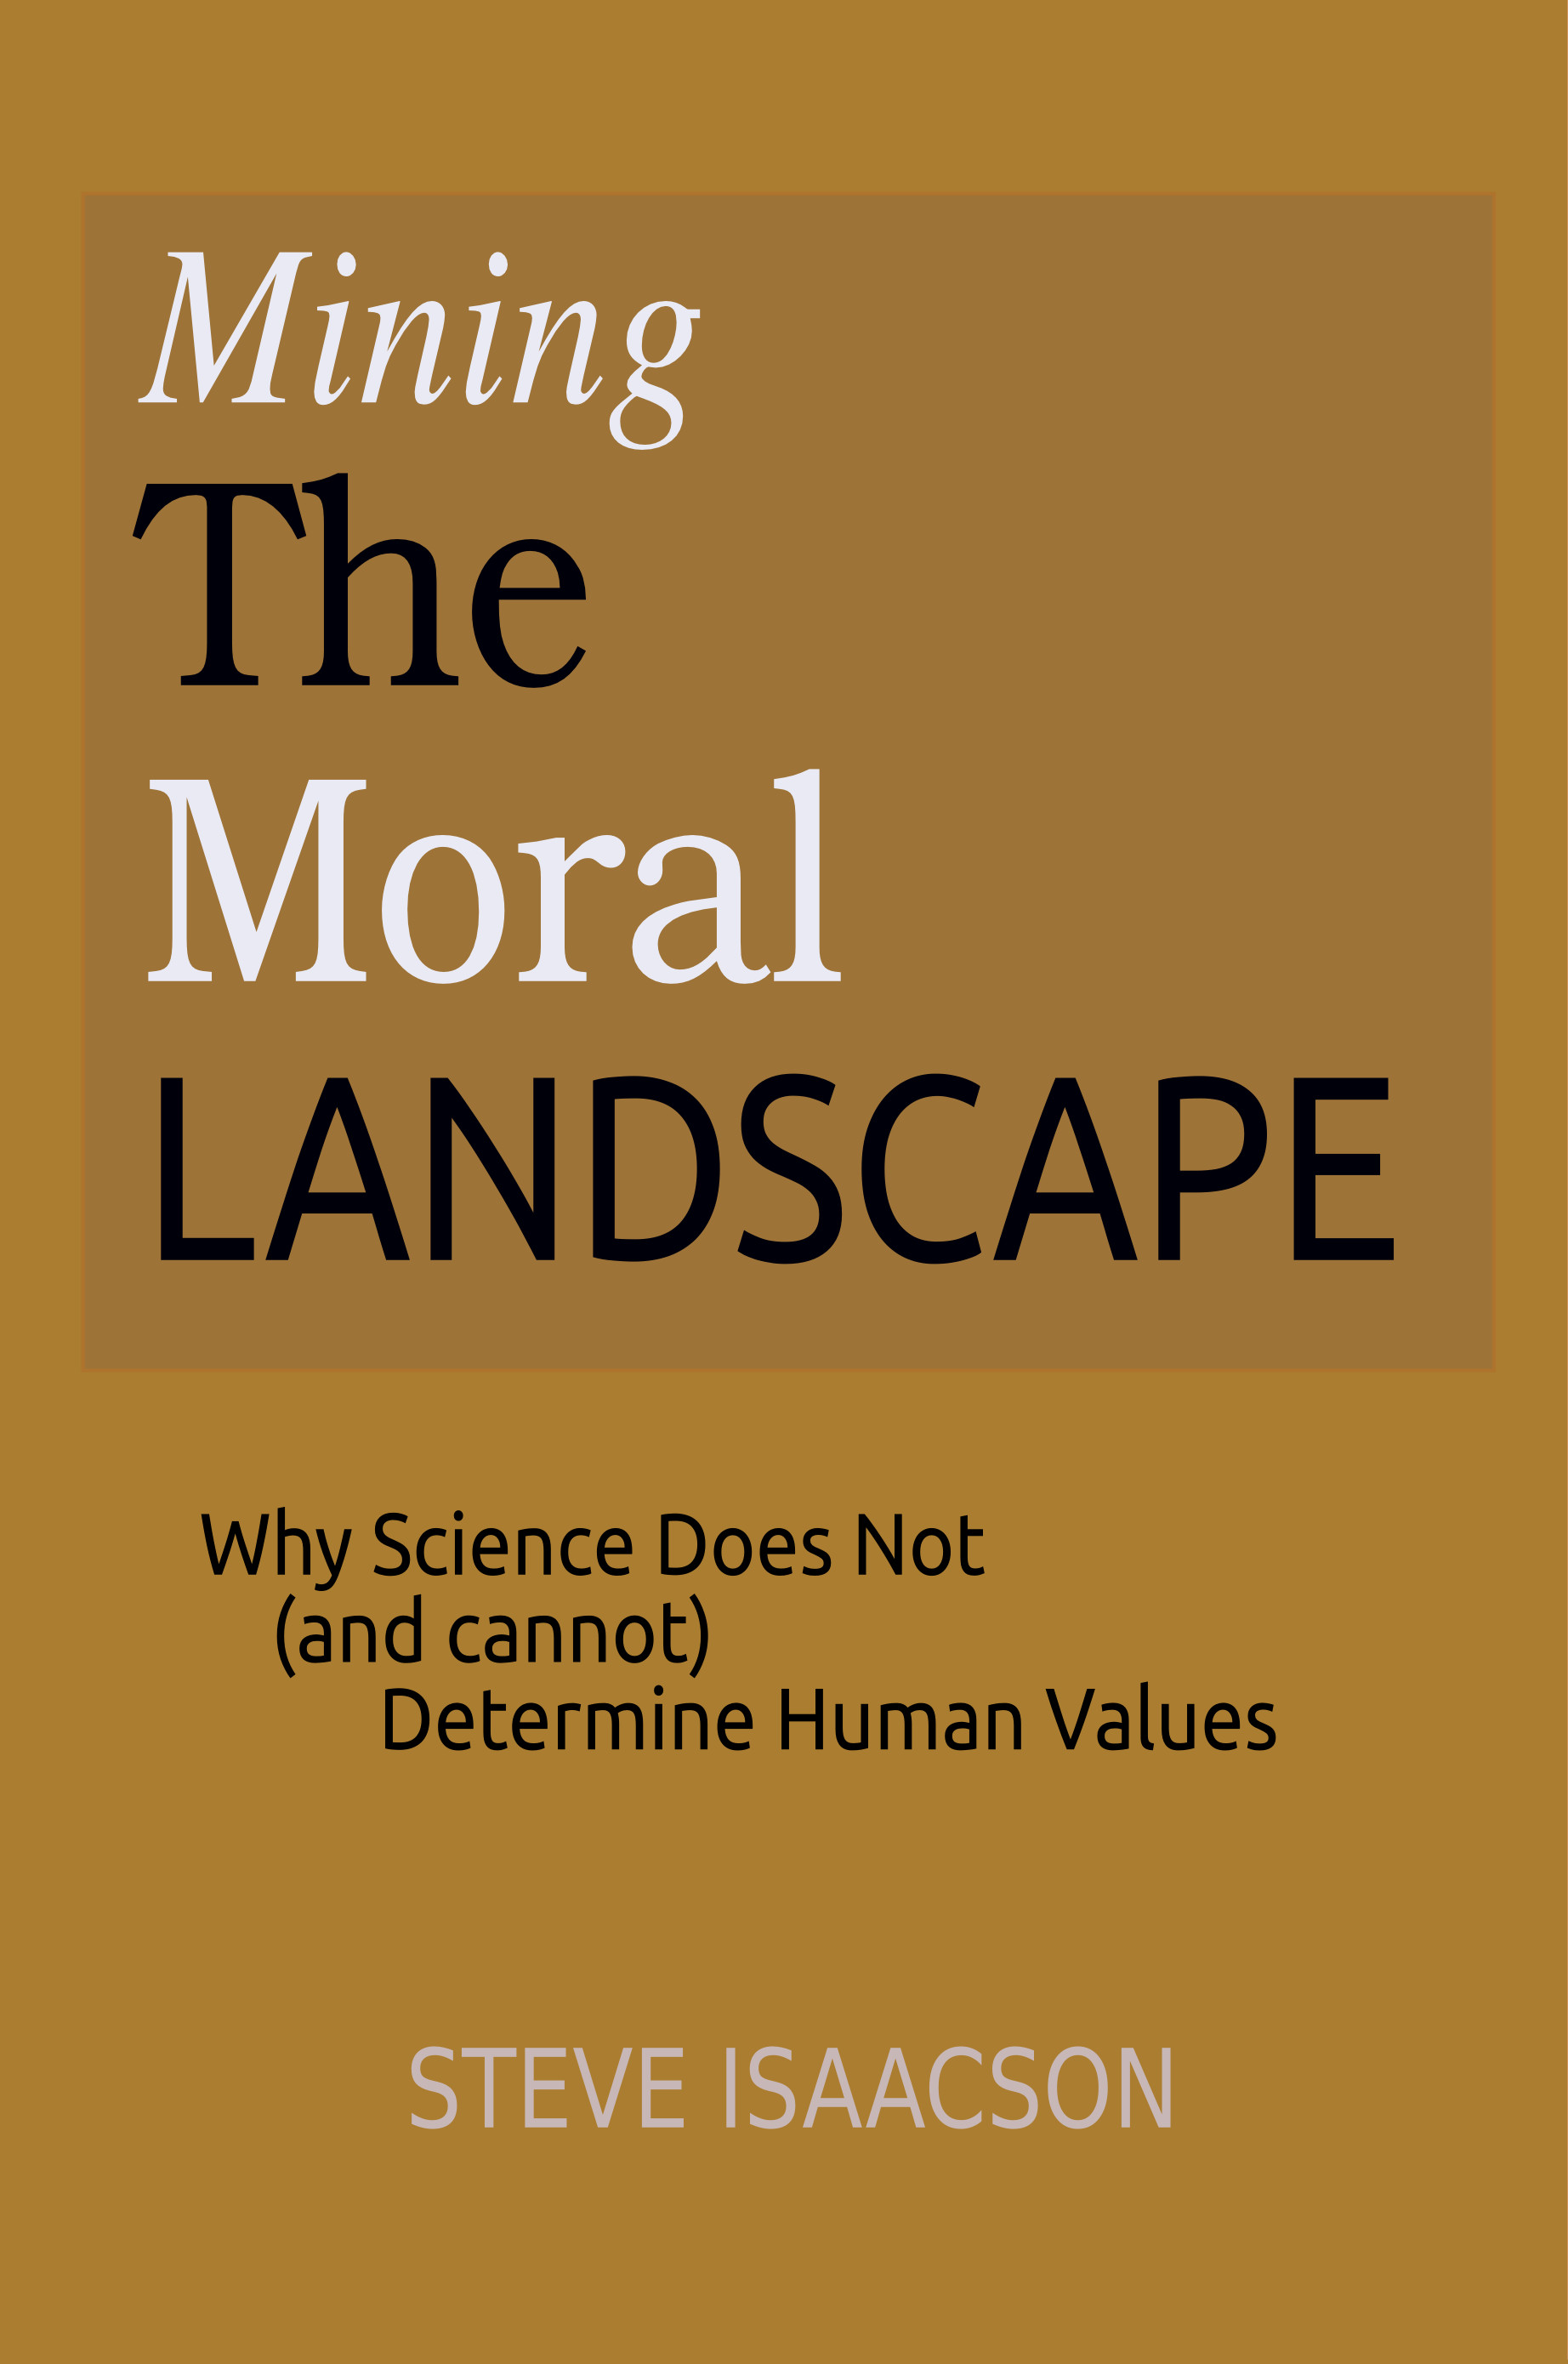 Best ideas about The Moral Landscape
. Save or Pin File Mining The Moral LANDSCAPE book cover Wikimedia Now.